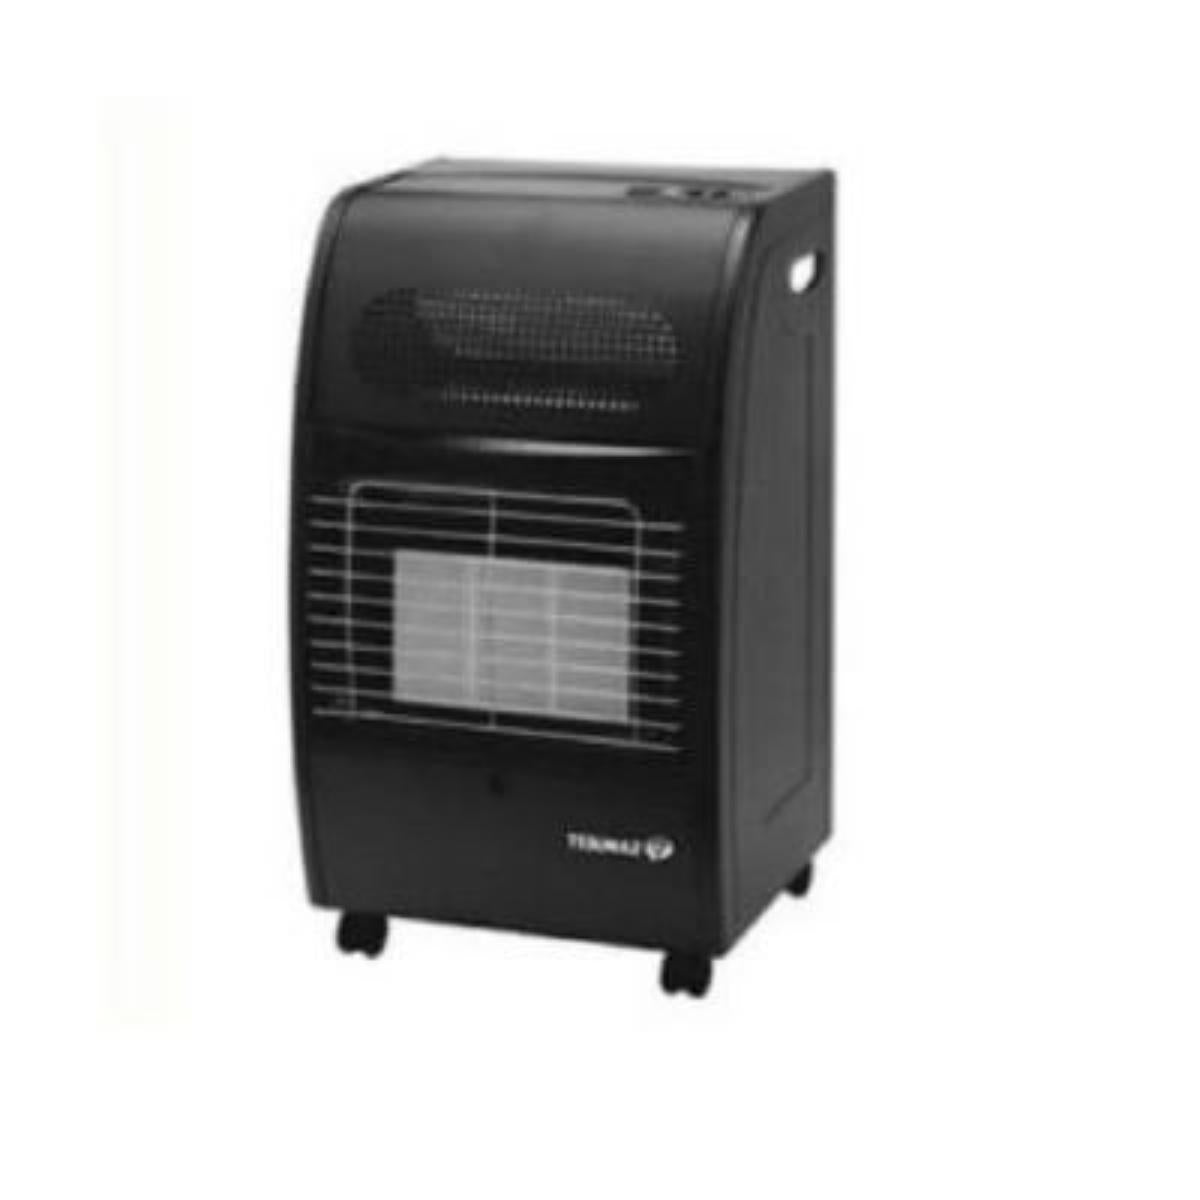 NAS-06/TEKMAZ GAS HEATER |Color: BLACK | Type of power: GAS | Safety System: YES | No. Of Elements: HEATER / 2000 WATTS